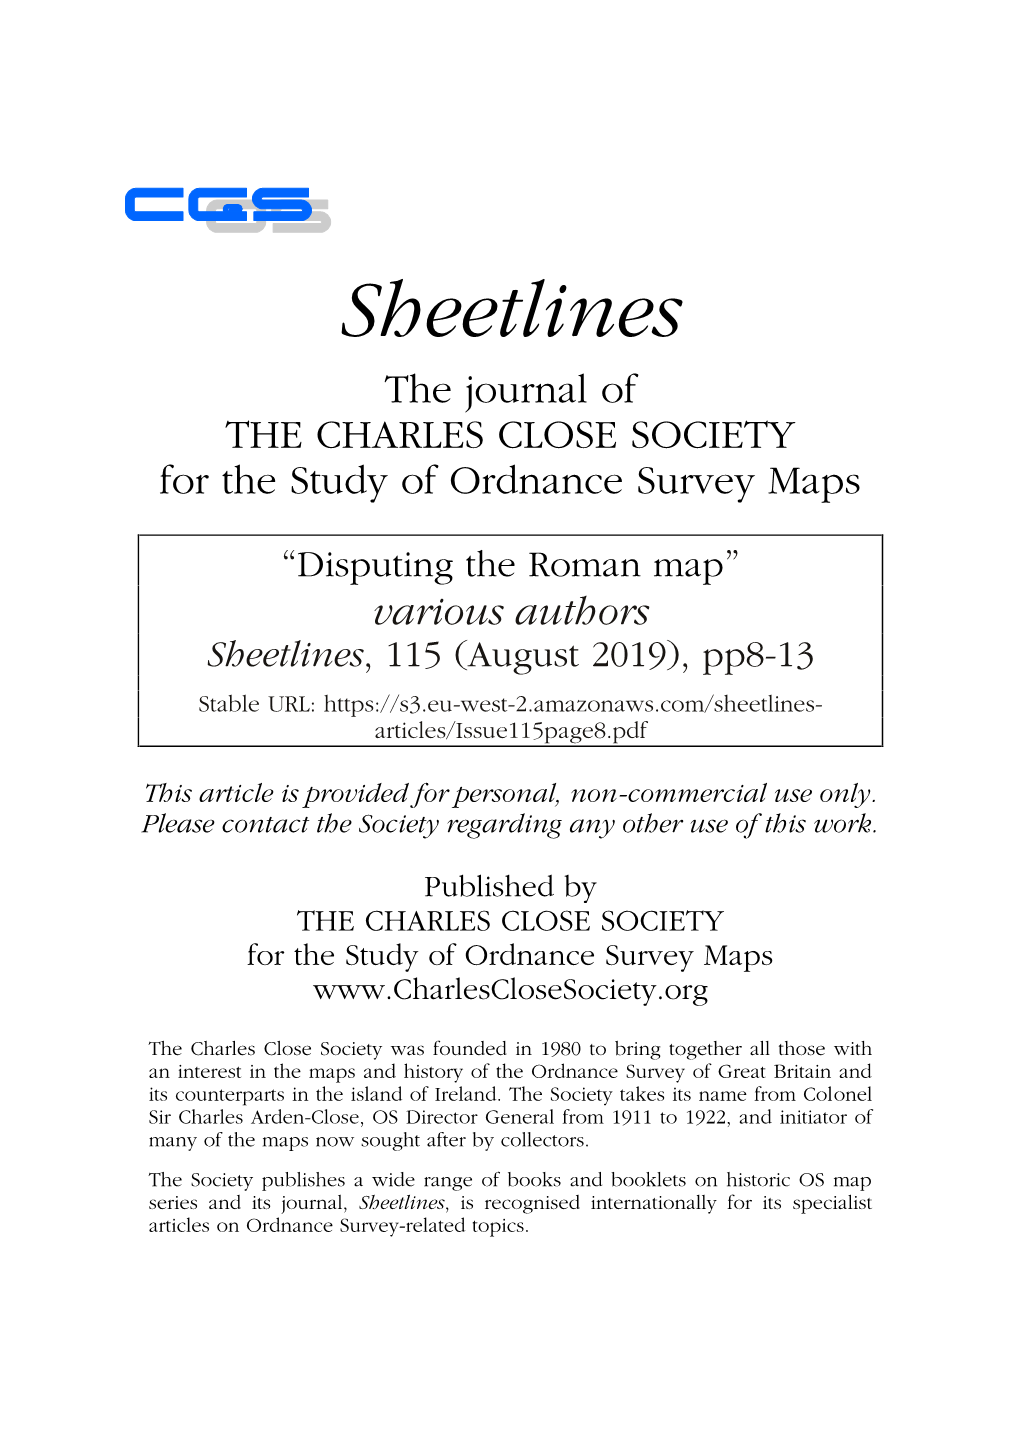 Sheetlines the Journal of the CHARLES CLOSE SOCIETY for the Study of Ordnance Survey Maps